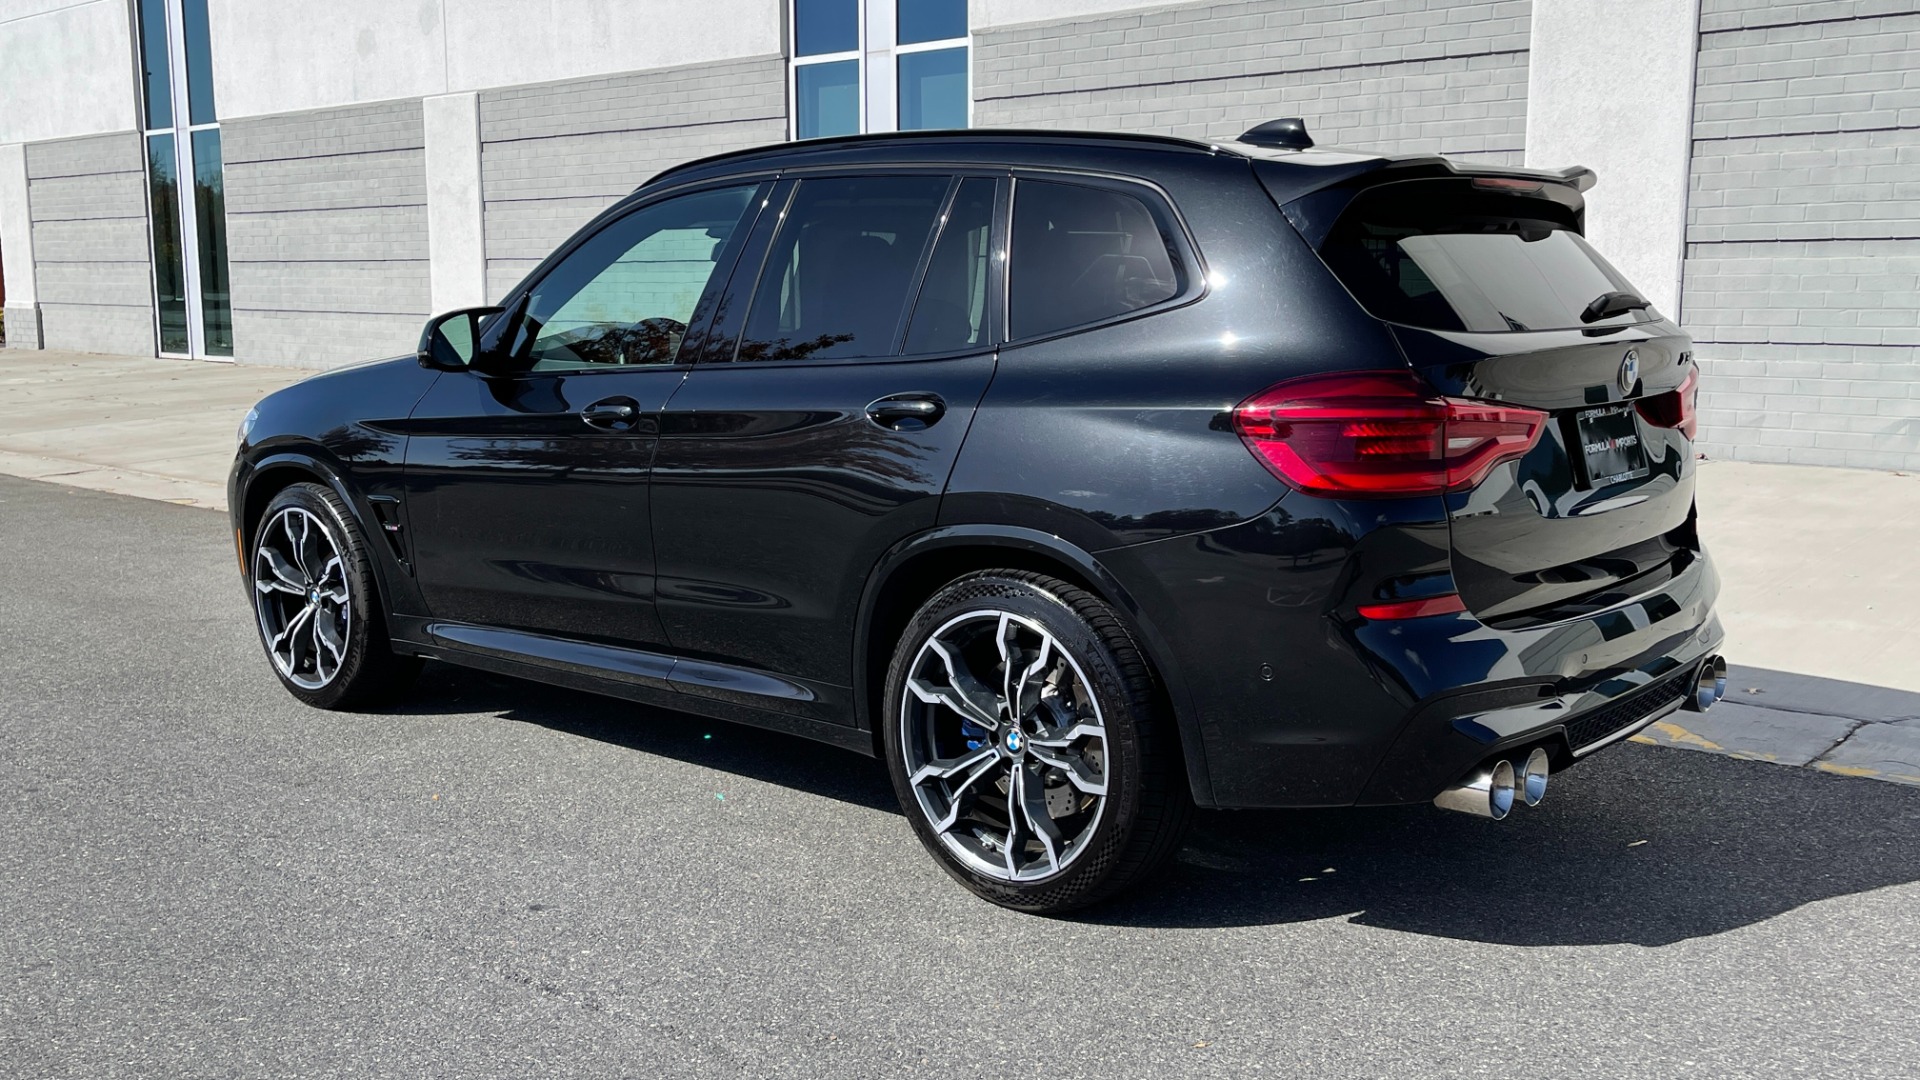 Used 2020 BMW X3 M MERINO LEATHER / EXECUTIVE PACKAGE / DINAN EXHAUST for sale $58,999 at Formula Imports in Charlotte NC 28227 4